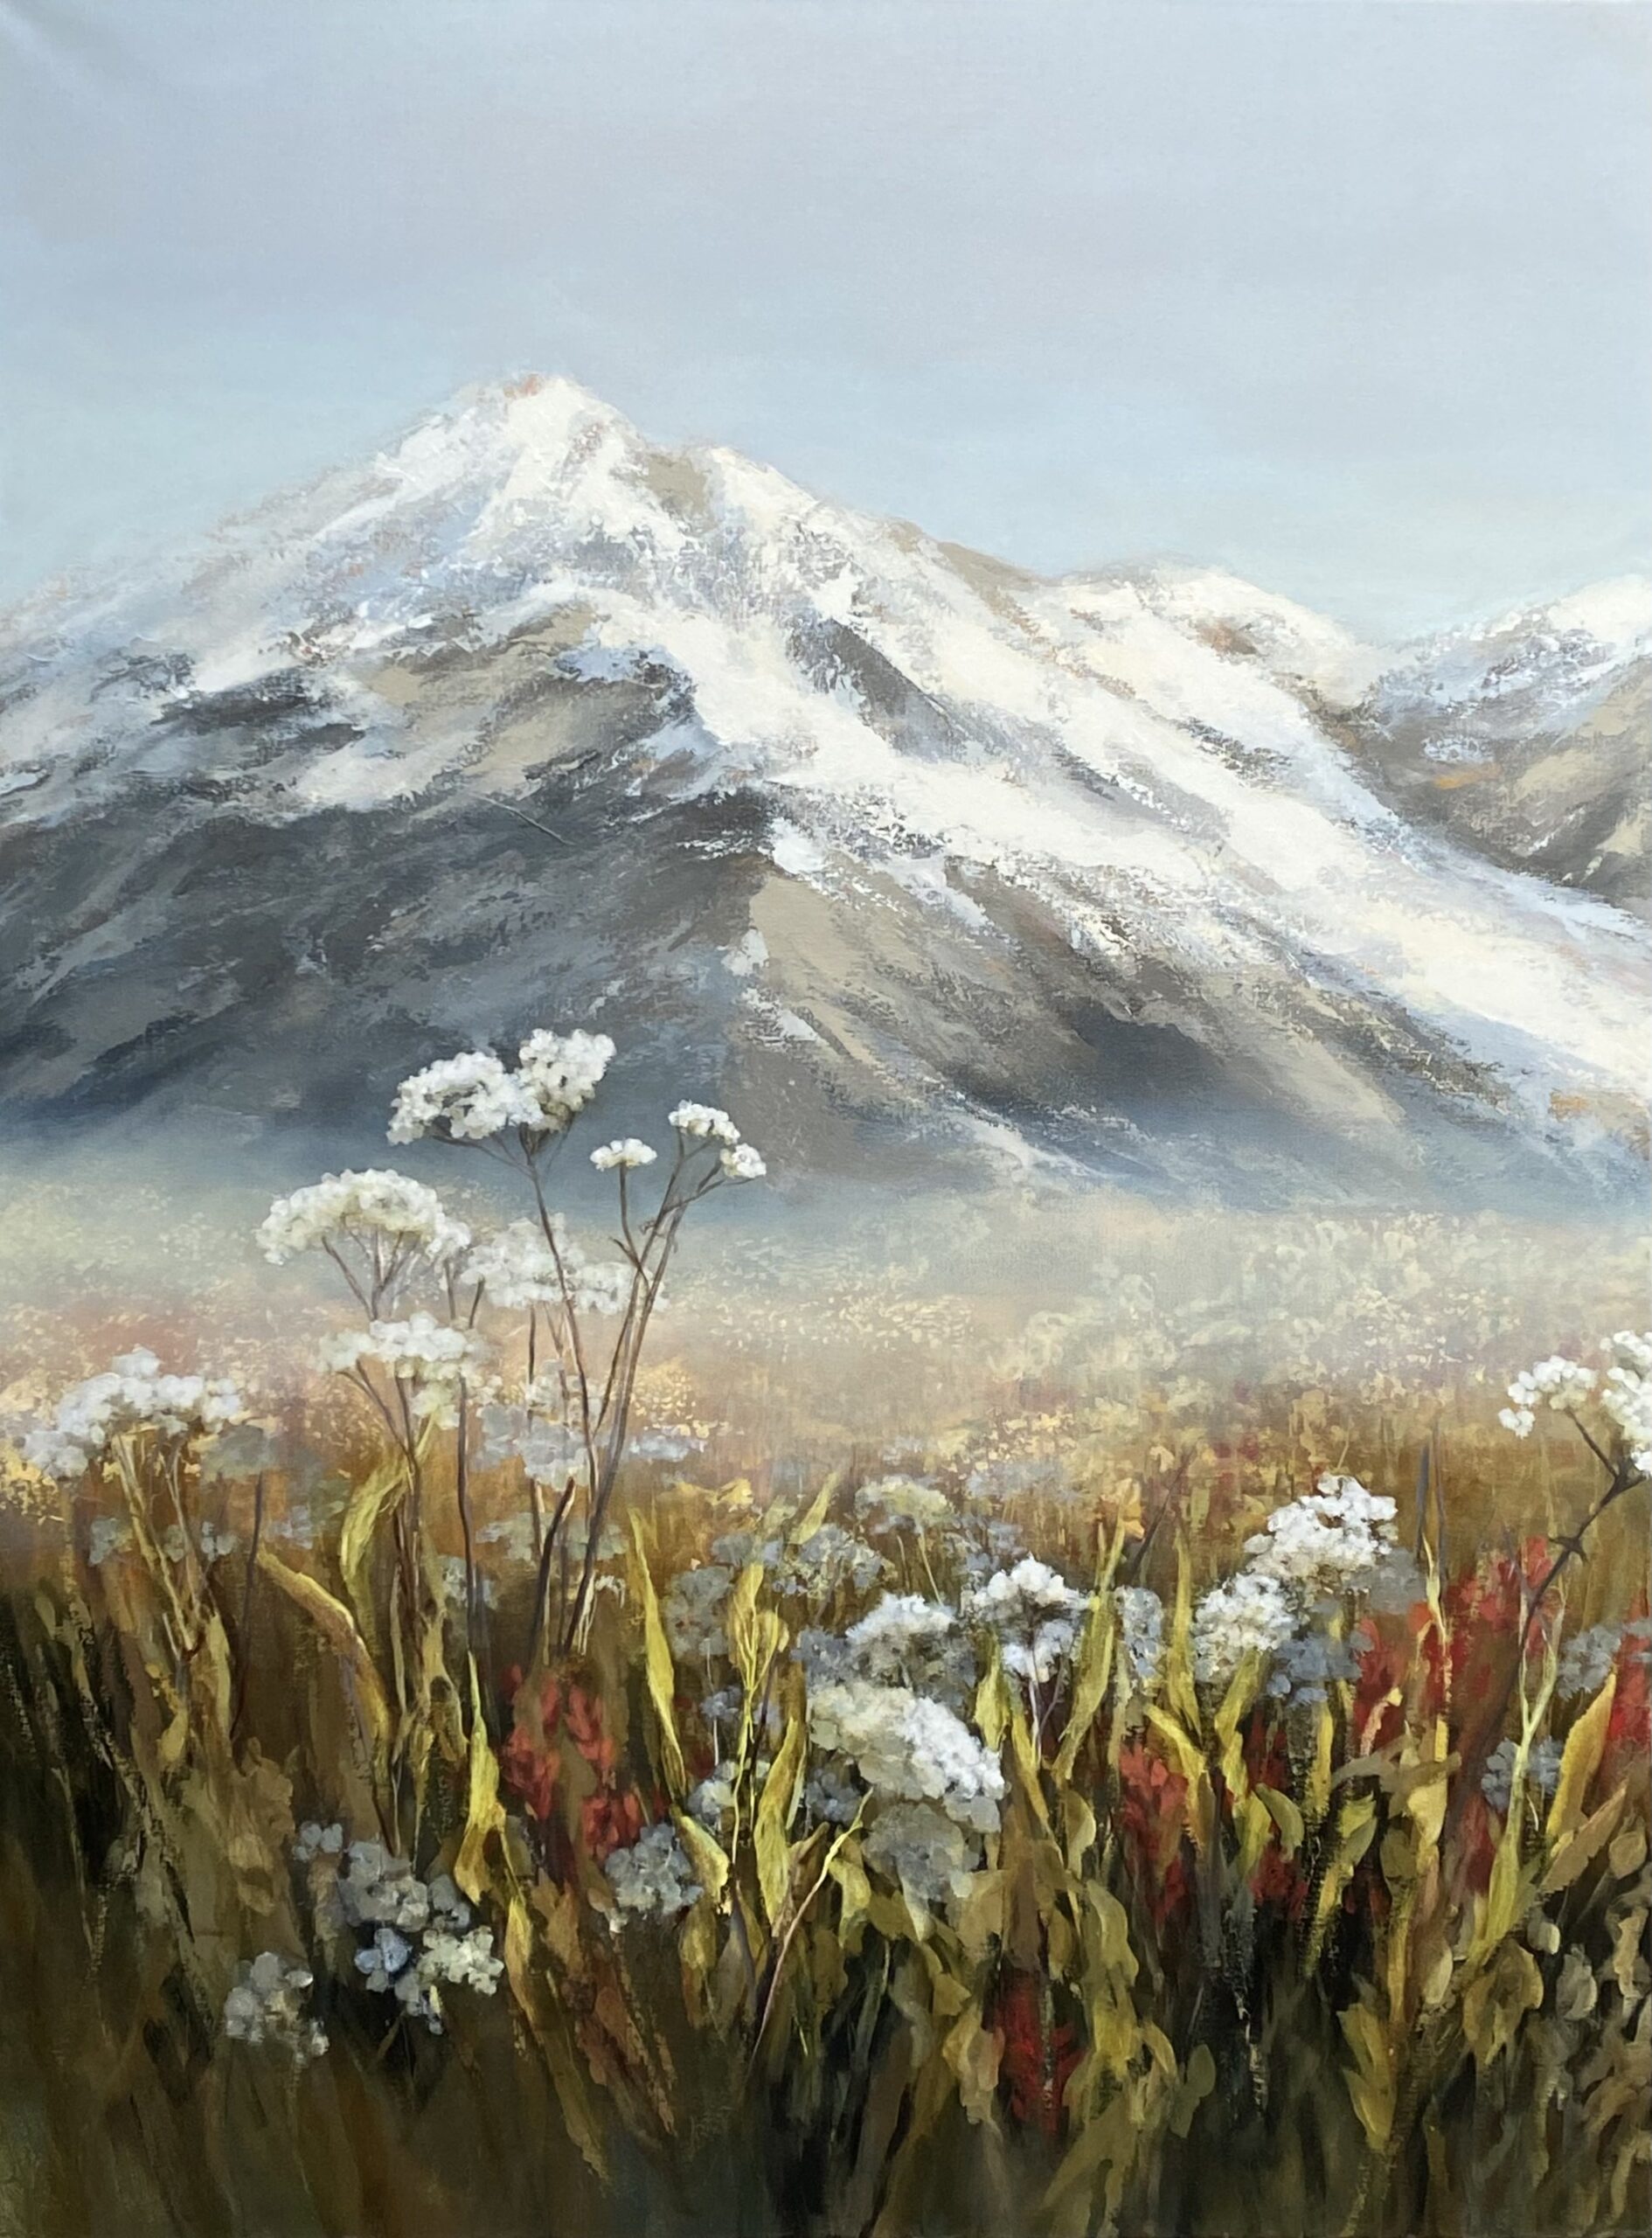 Alpine Meadow, original acrylic landscape painting by Jane Bronsch at Effusion Art Gallery in Invermere BC.